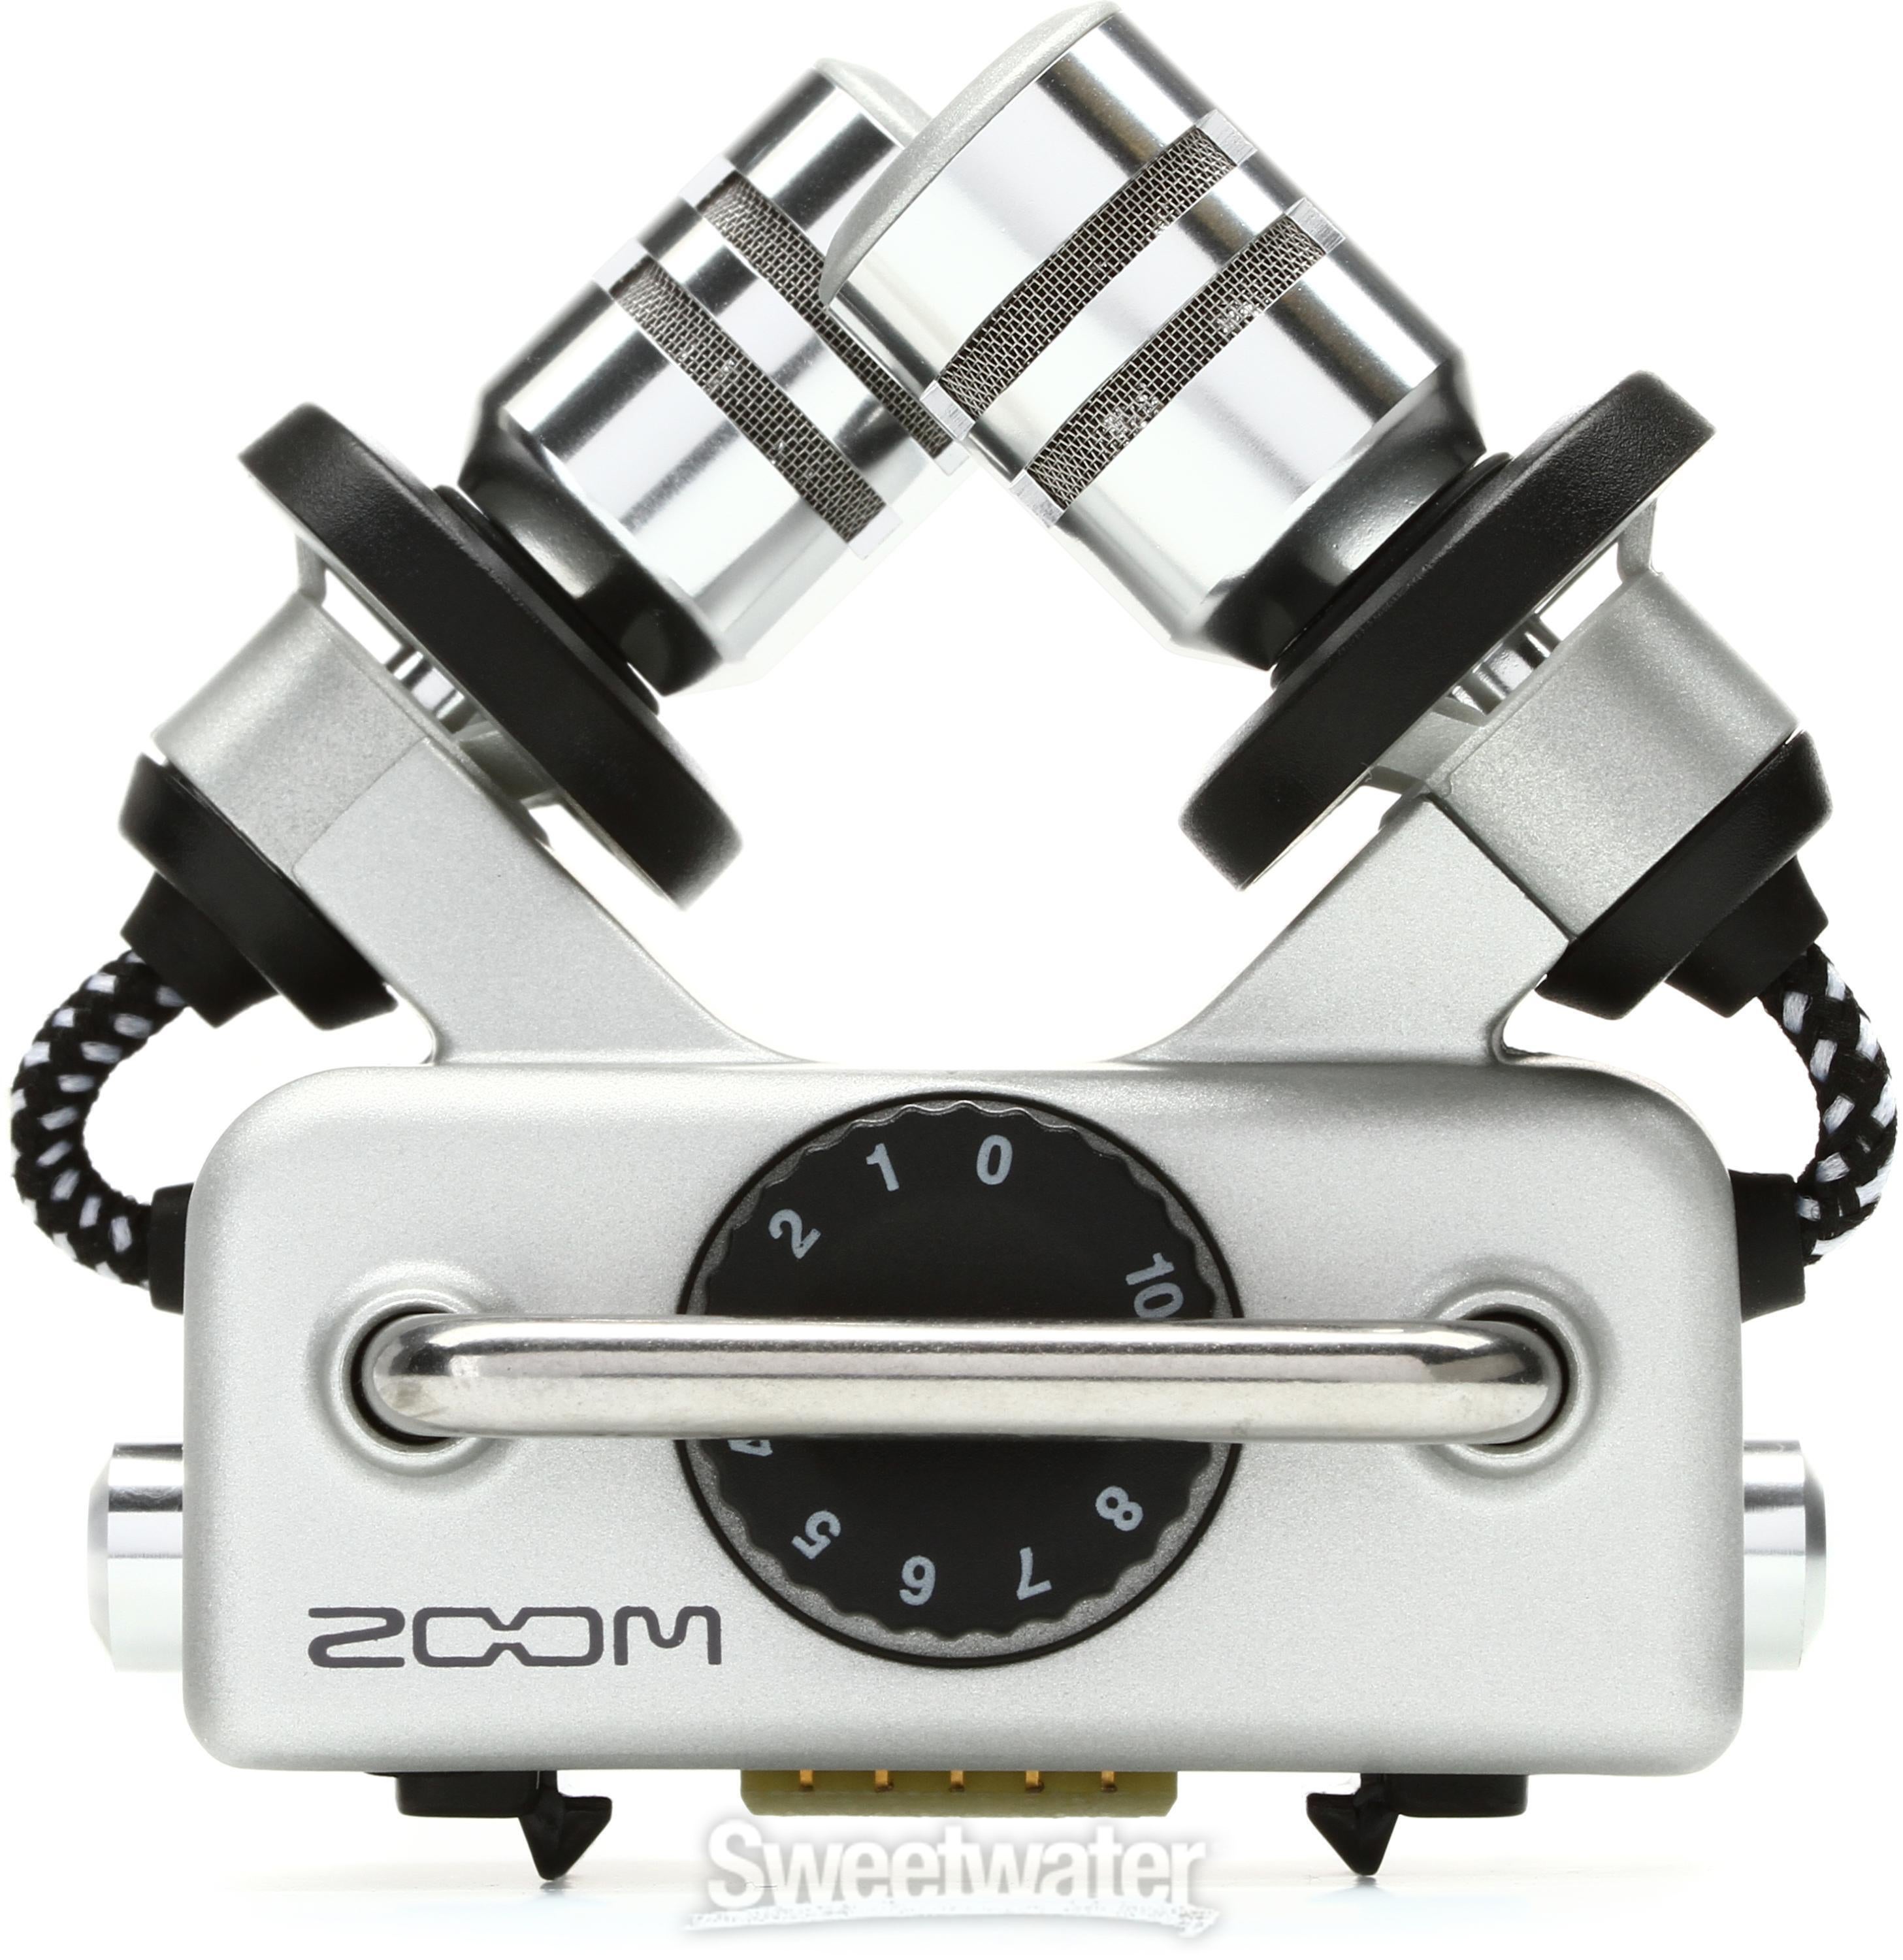 Zoom XYH-5 Shockmounted Stereo X/Y Microphone Capsule